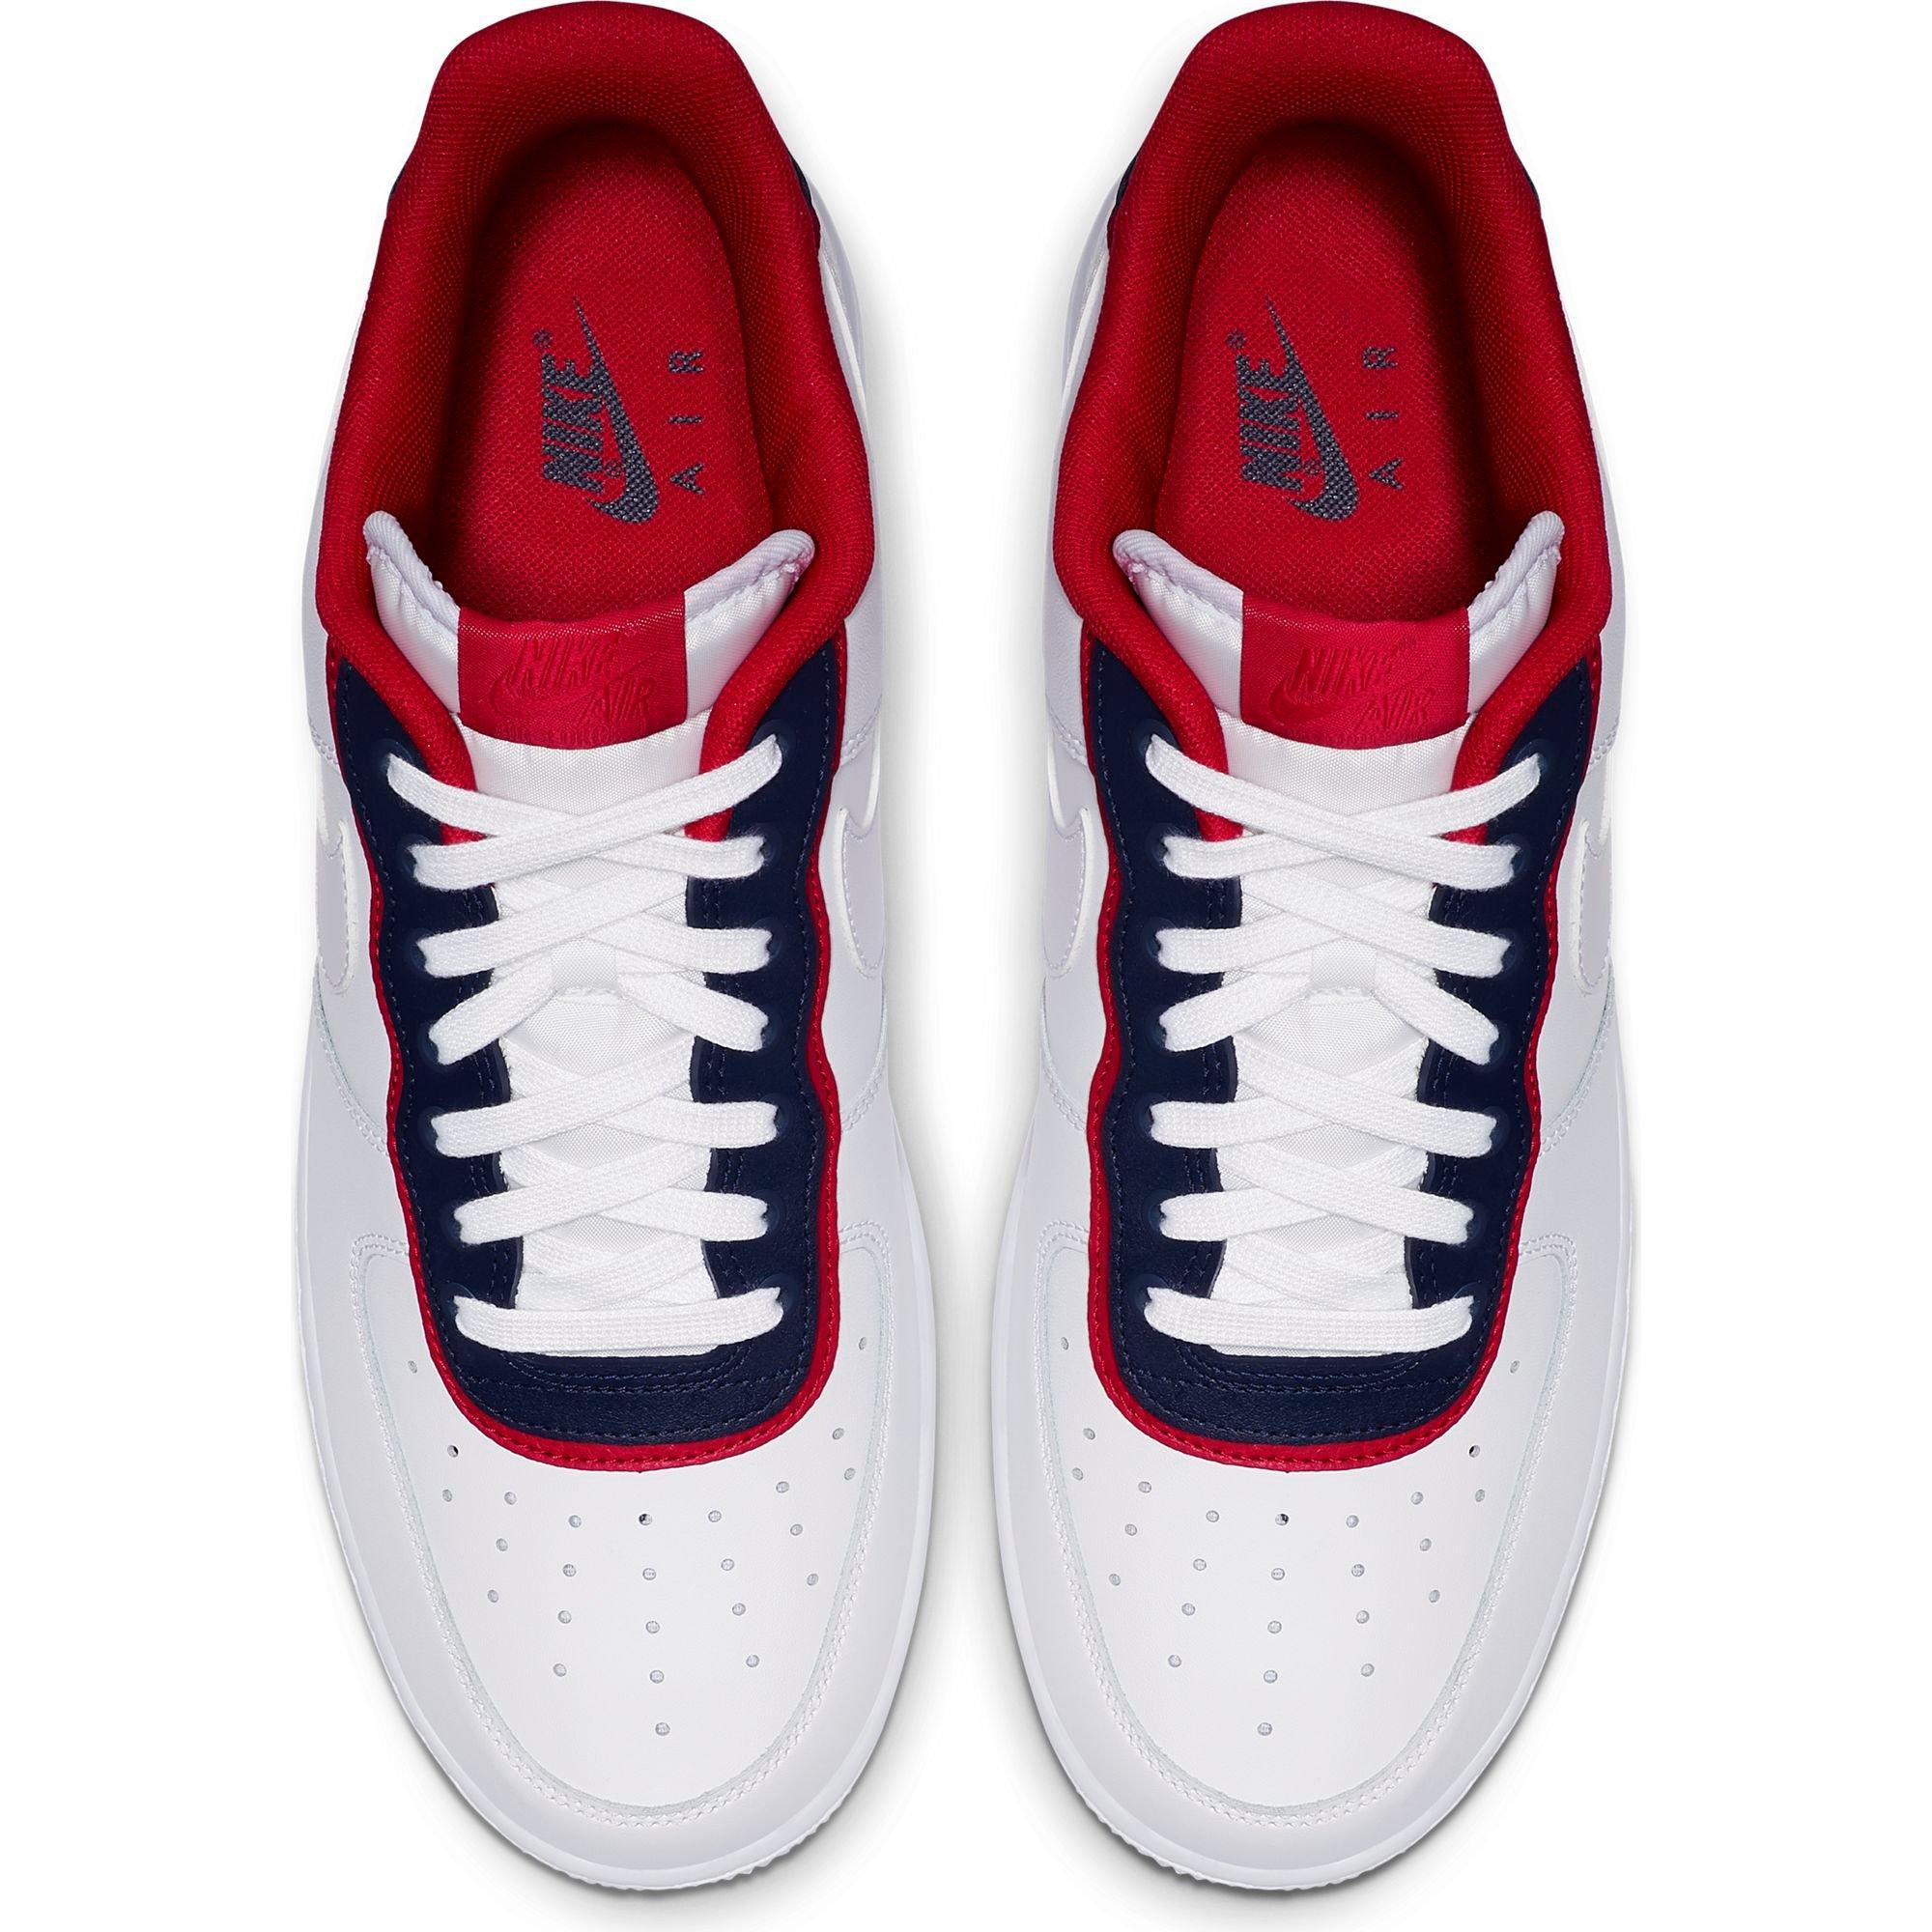 air force 1 double layer white obsidian red